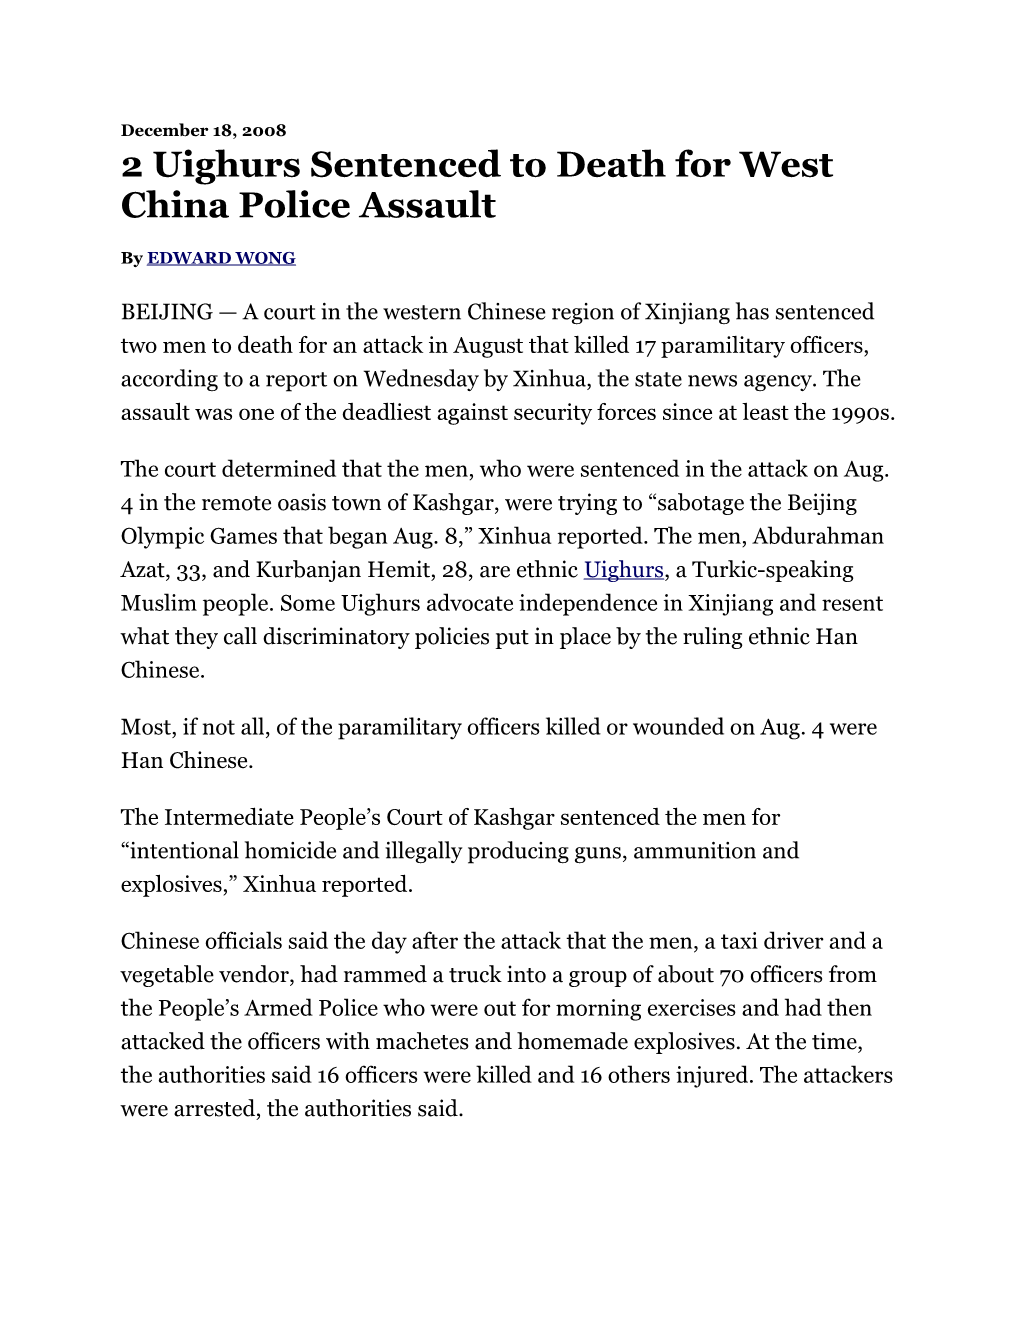 2 Uighurs Sentenced to Death for West China Police Assault